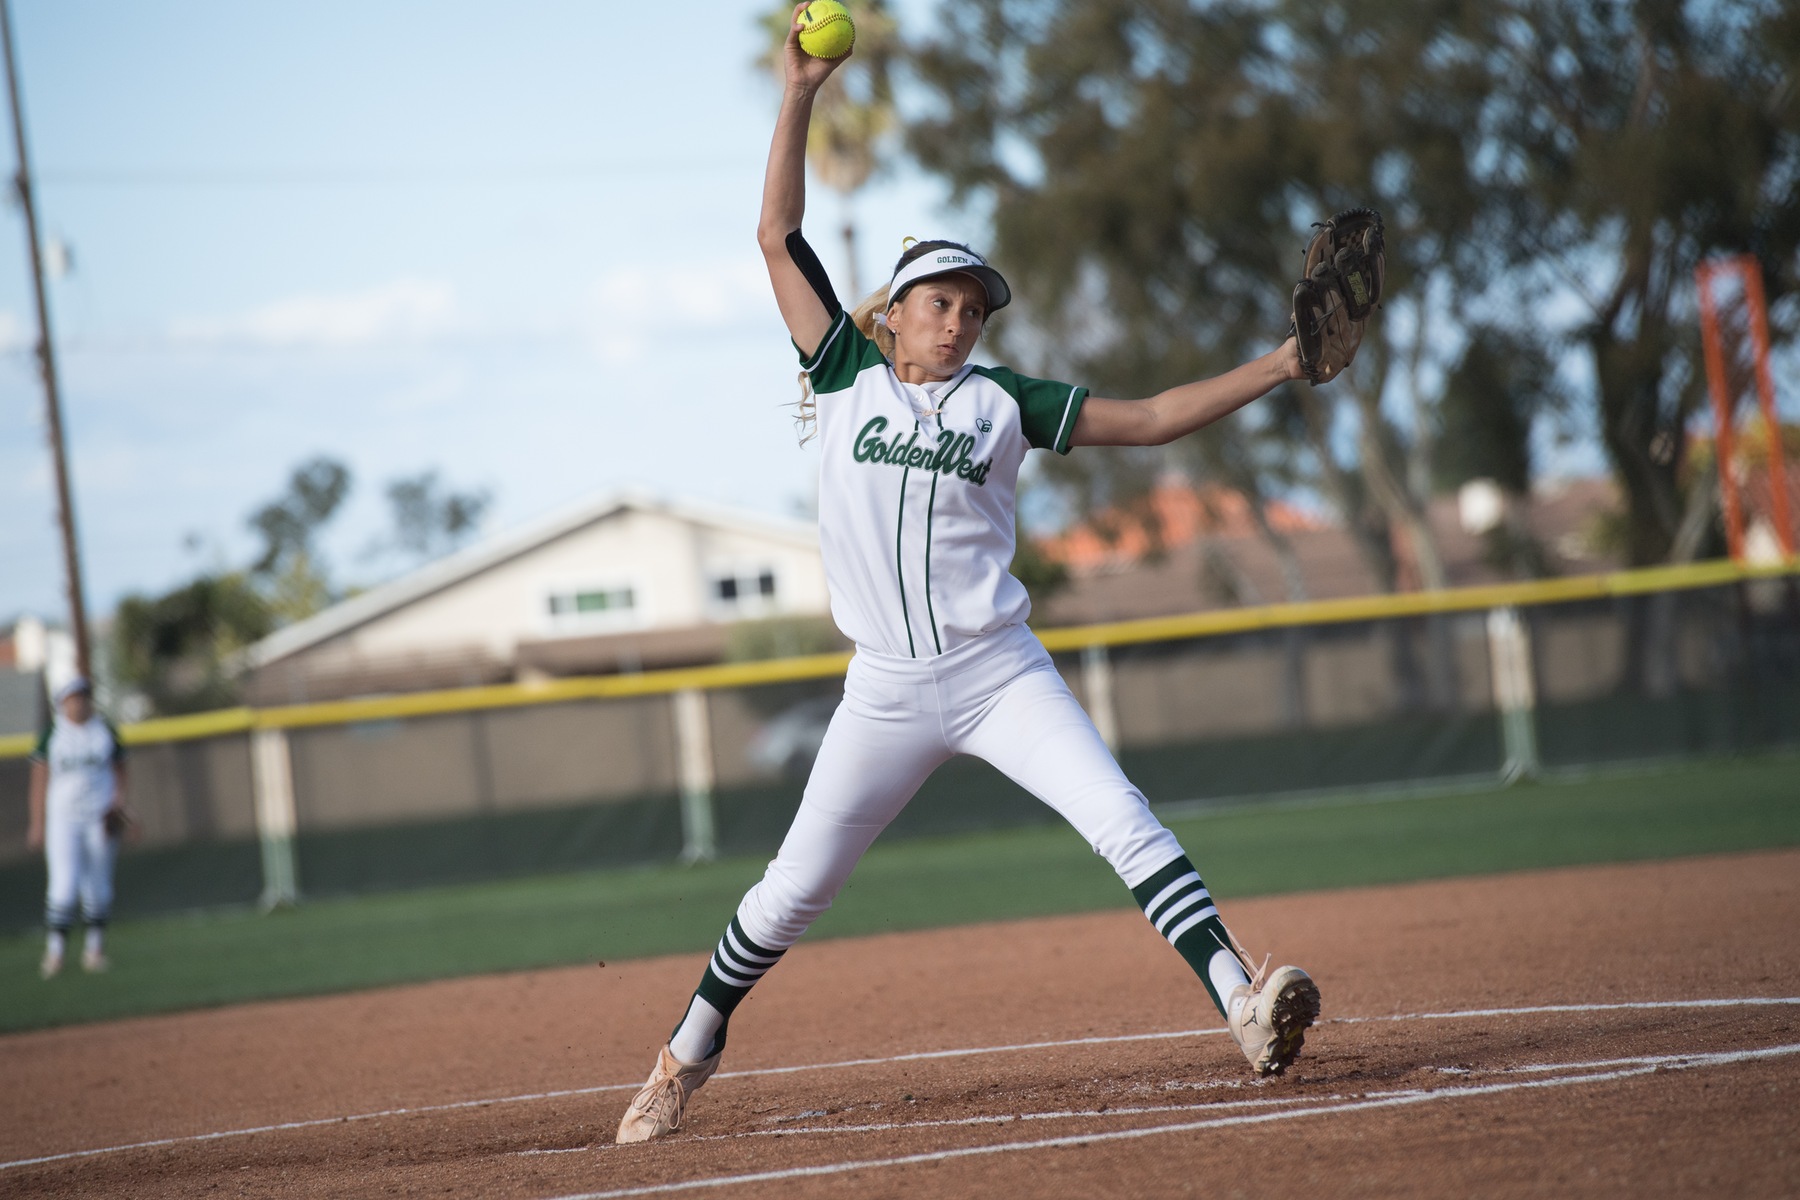 Softball: First Inning Errors Lead to Tough Loss